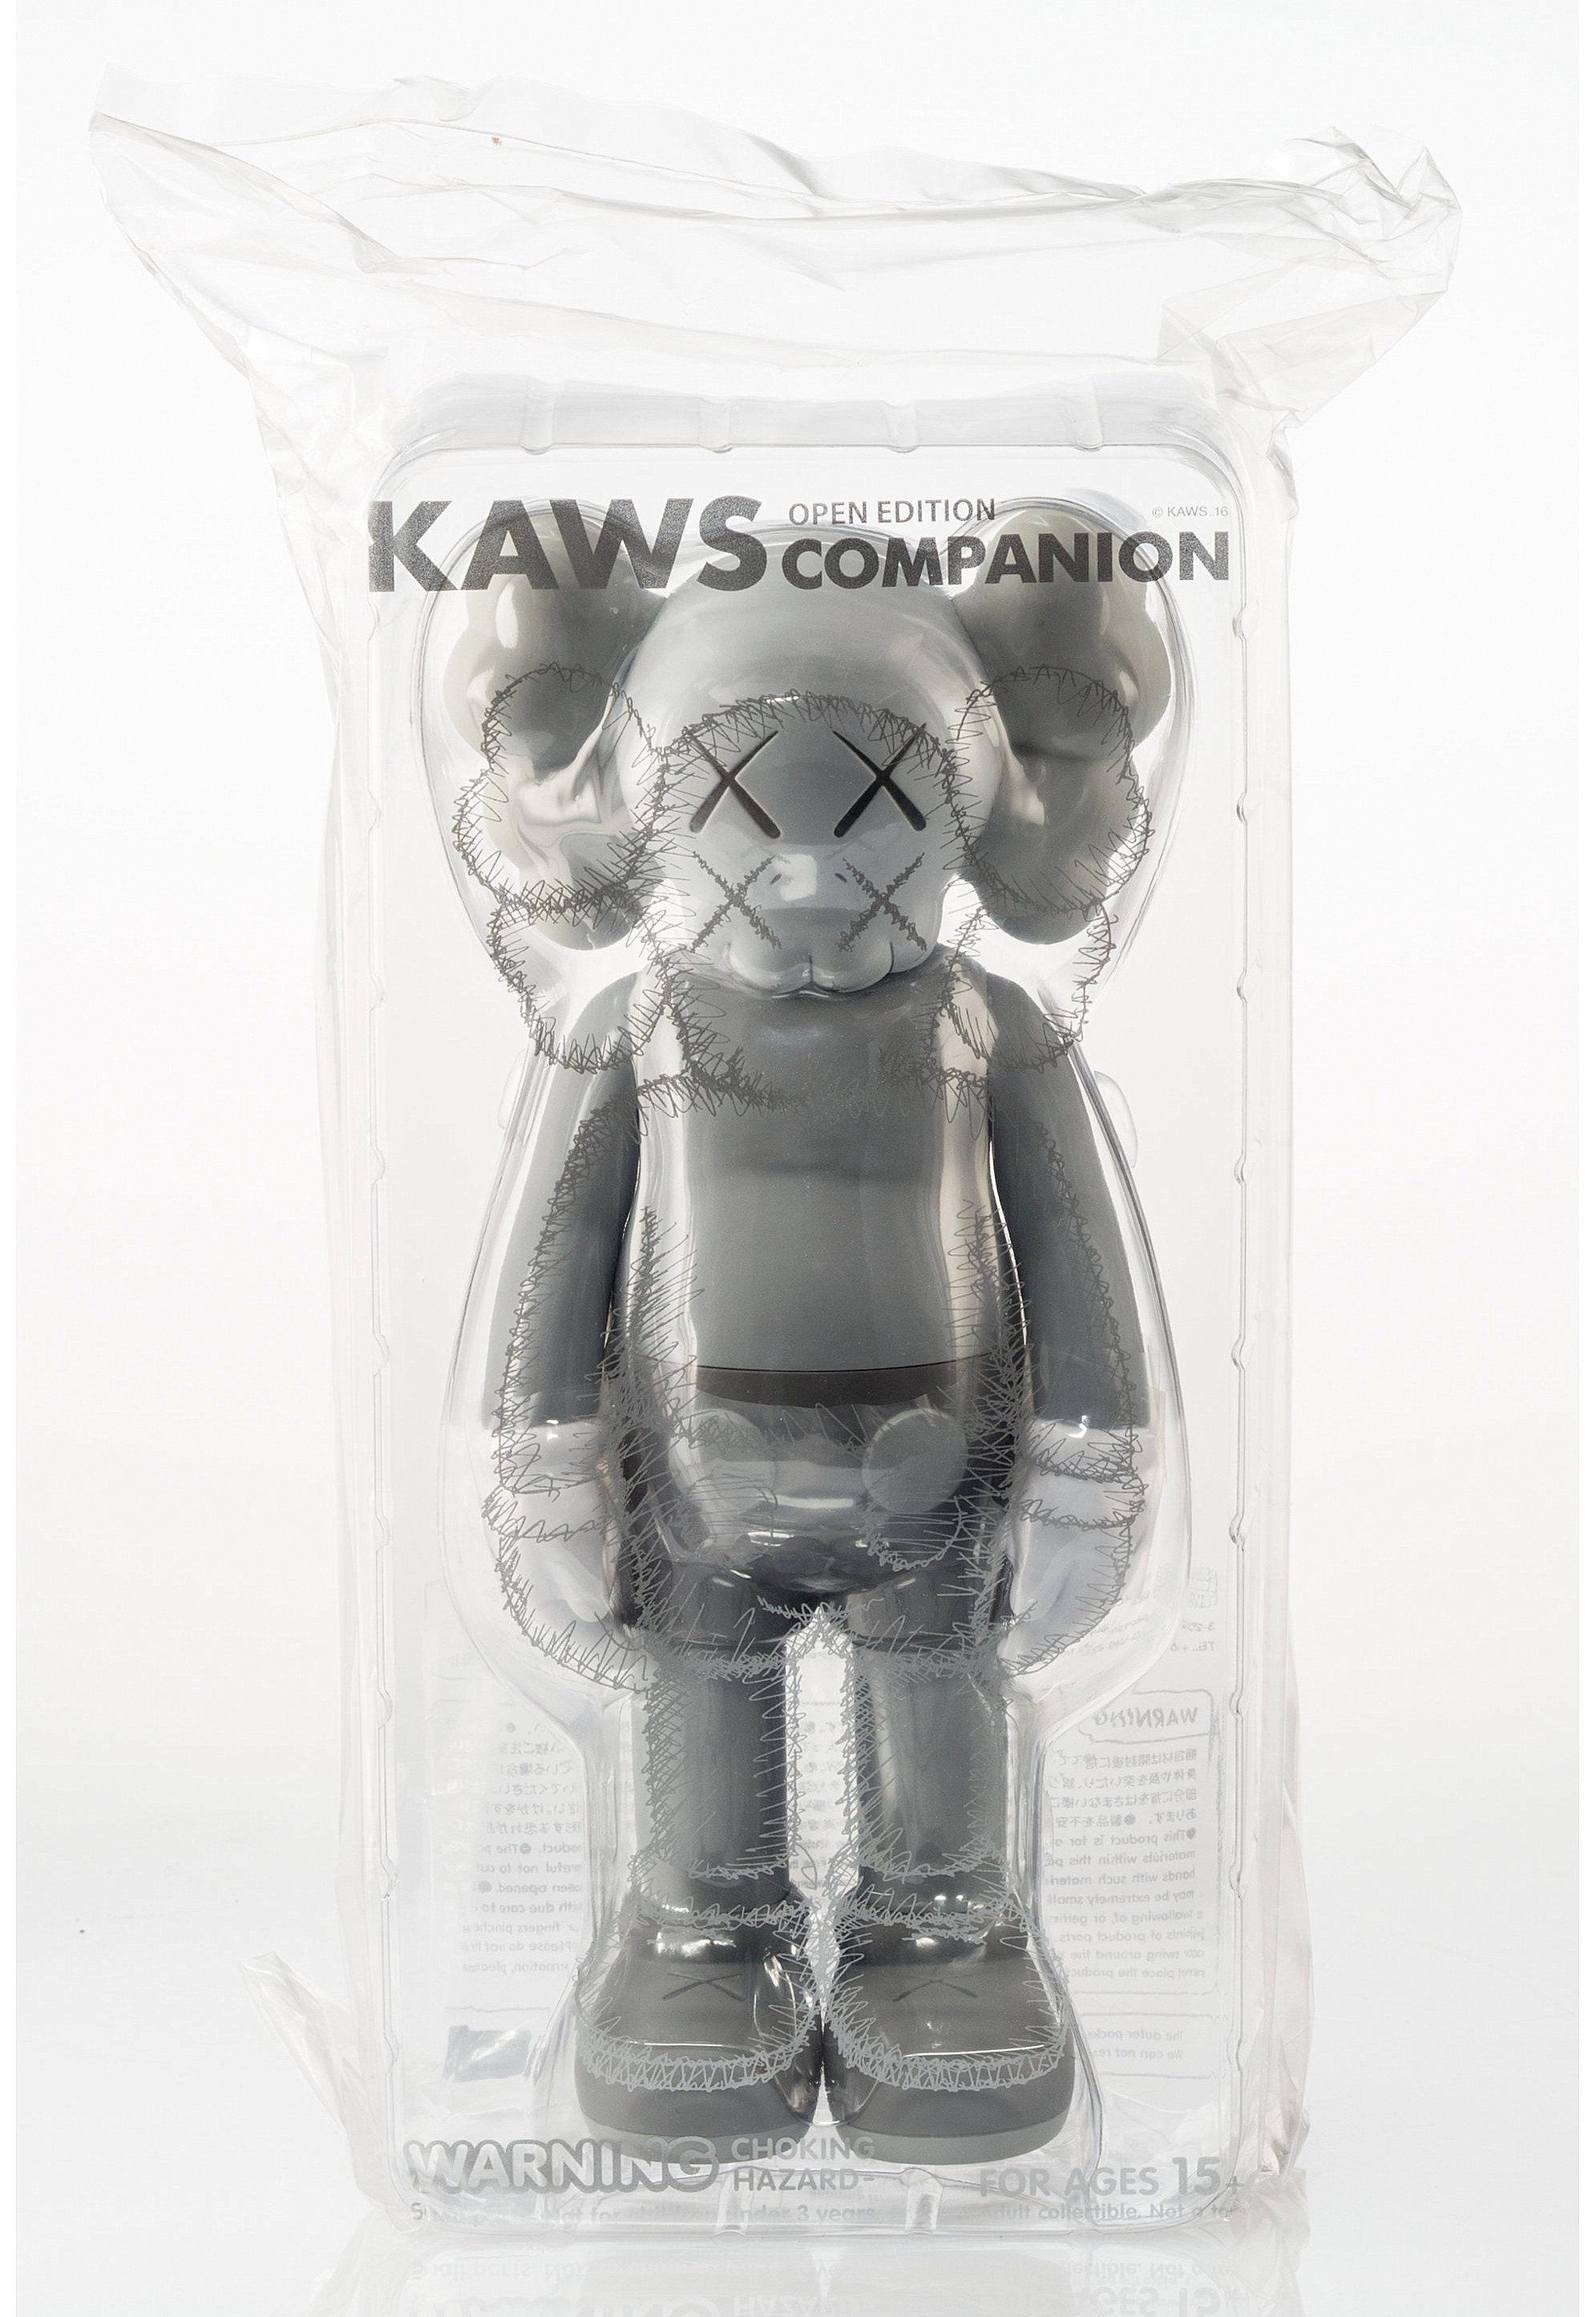 KAWS Companion 2016. Gray, Full Body (non-dissected) toy figure, brand new, sealed in original packaging. 
Published by Medicom Japan in conjunction with the exhibition KAWS: Where The End Starts at the Modern Art Museum of Fort Worth. 
The